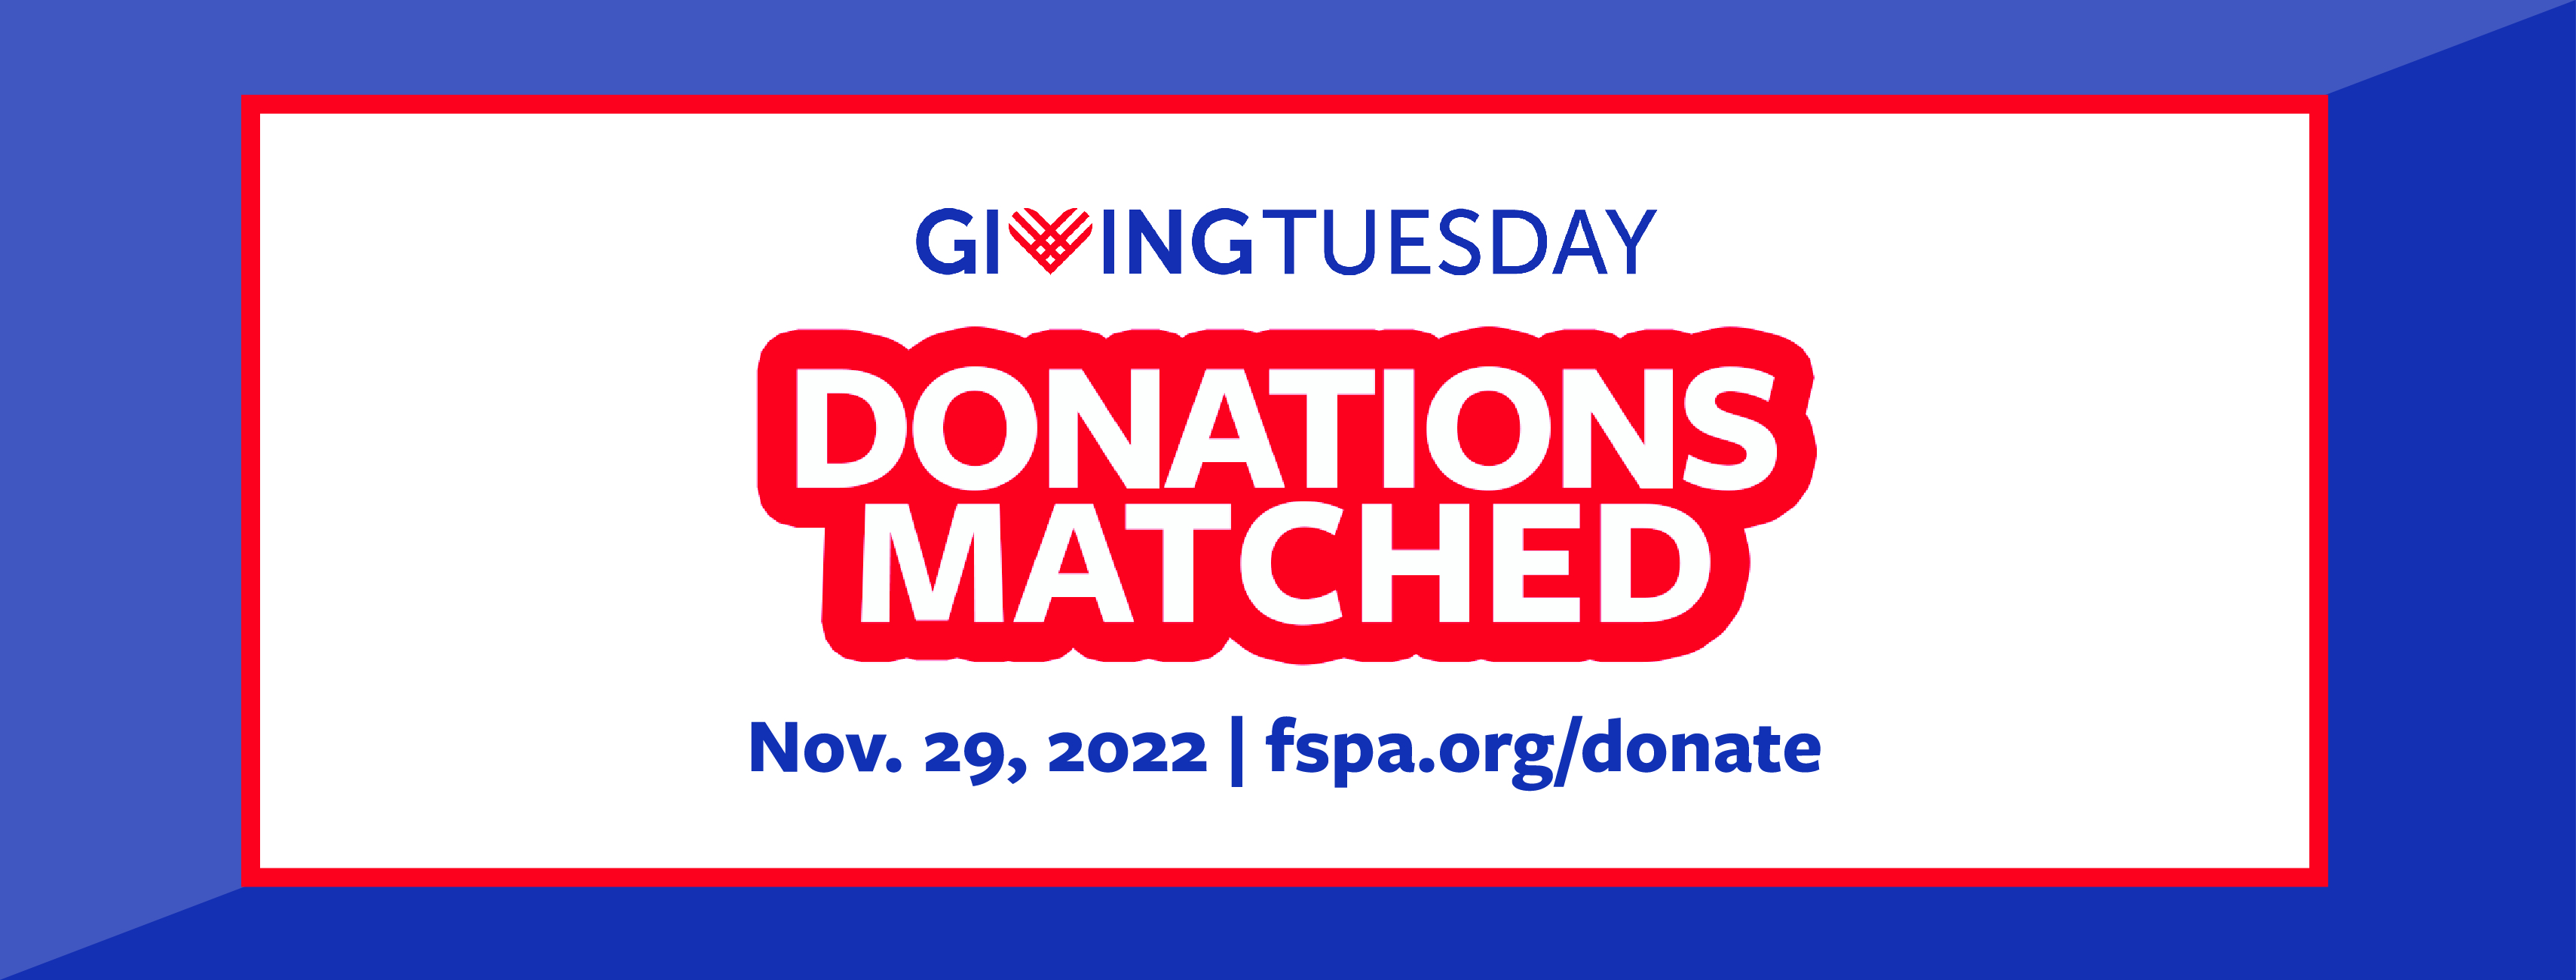 GivingTuesday 2022 graphic